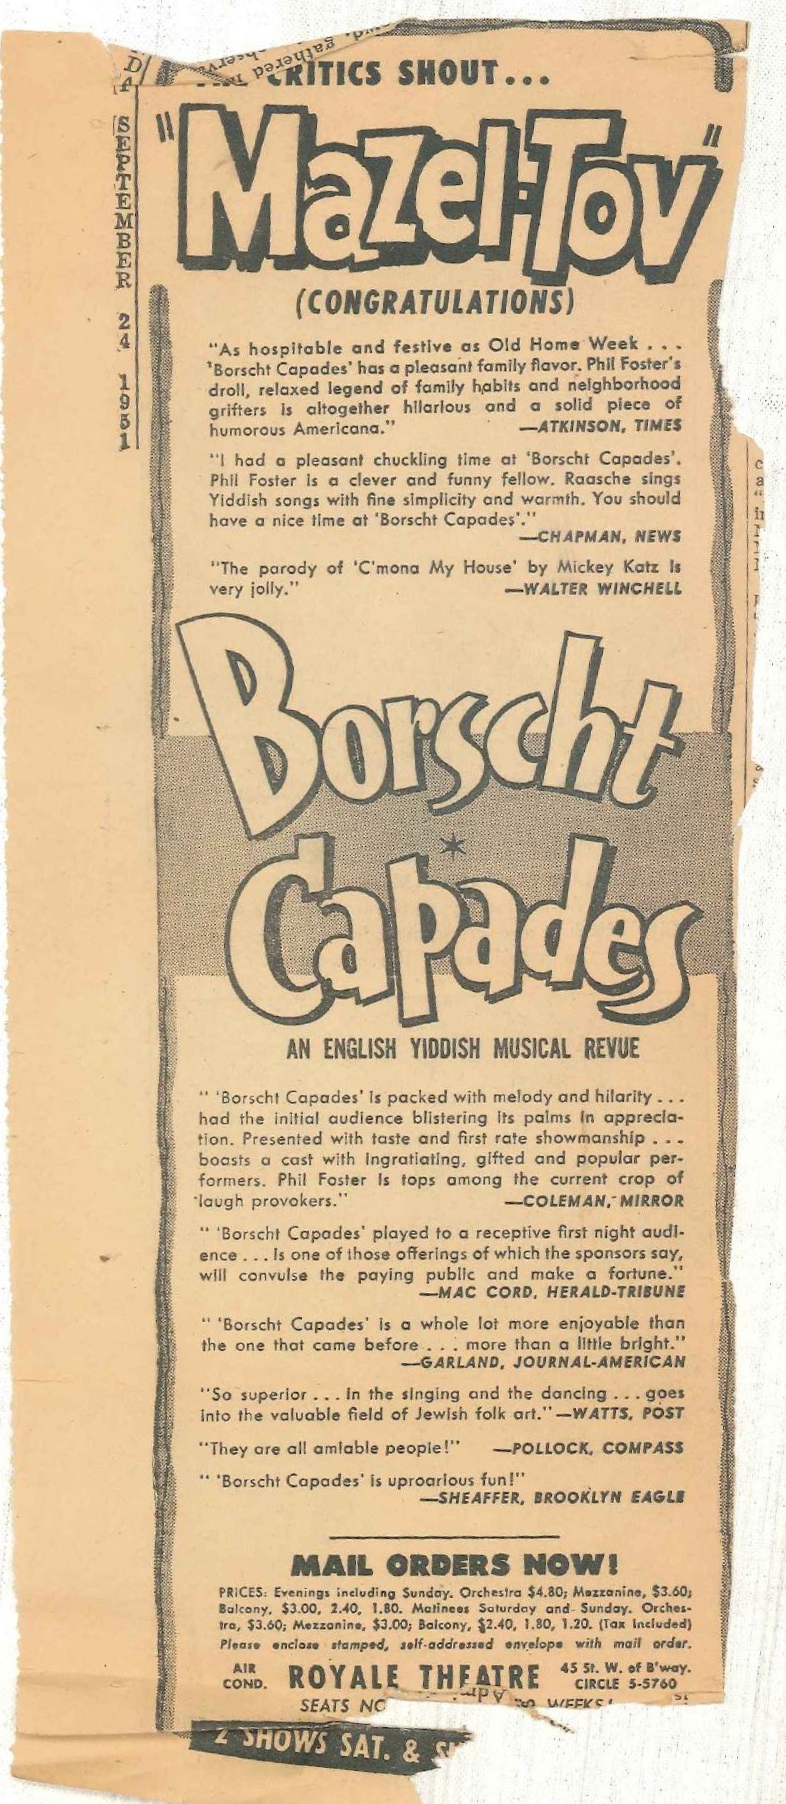 0026NC_Newspaper ad for the Borscht Capades at the Royale Theatre_Clippings